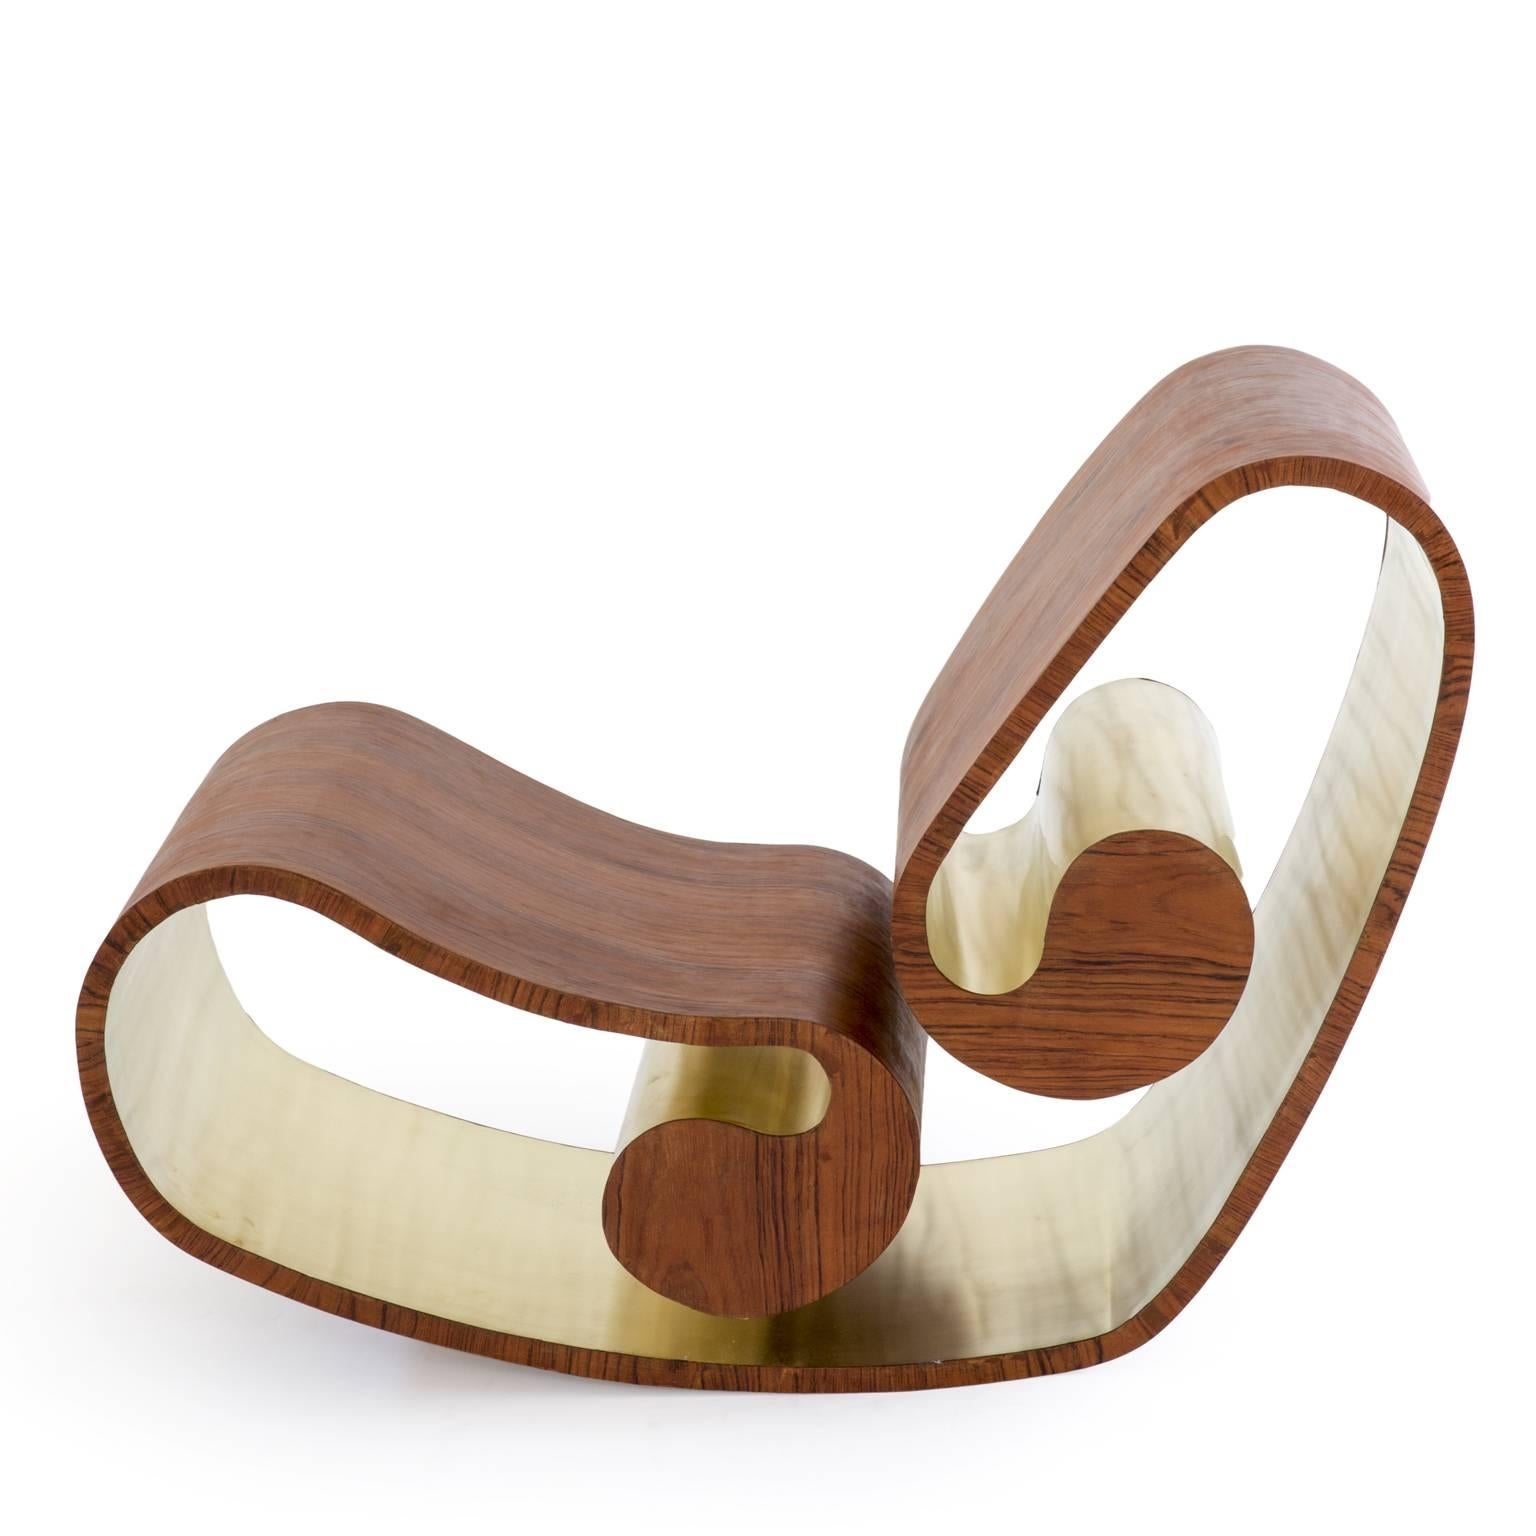 The Voluta rocking chair, designed by Stefano Marolla, made of wood, carbon fiber and brass, is inspired to the classical organic plastic shapes, hiding behind its apparently simple structure, the complex technique needed to obtain the elastic